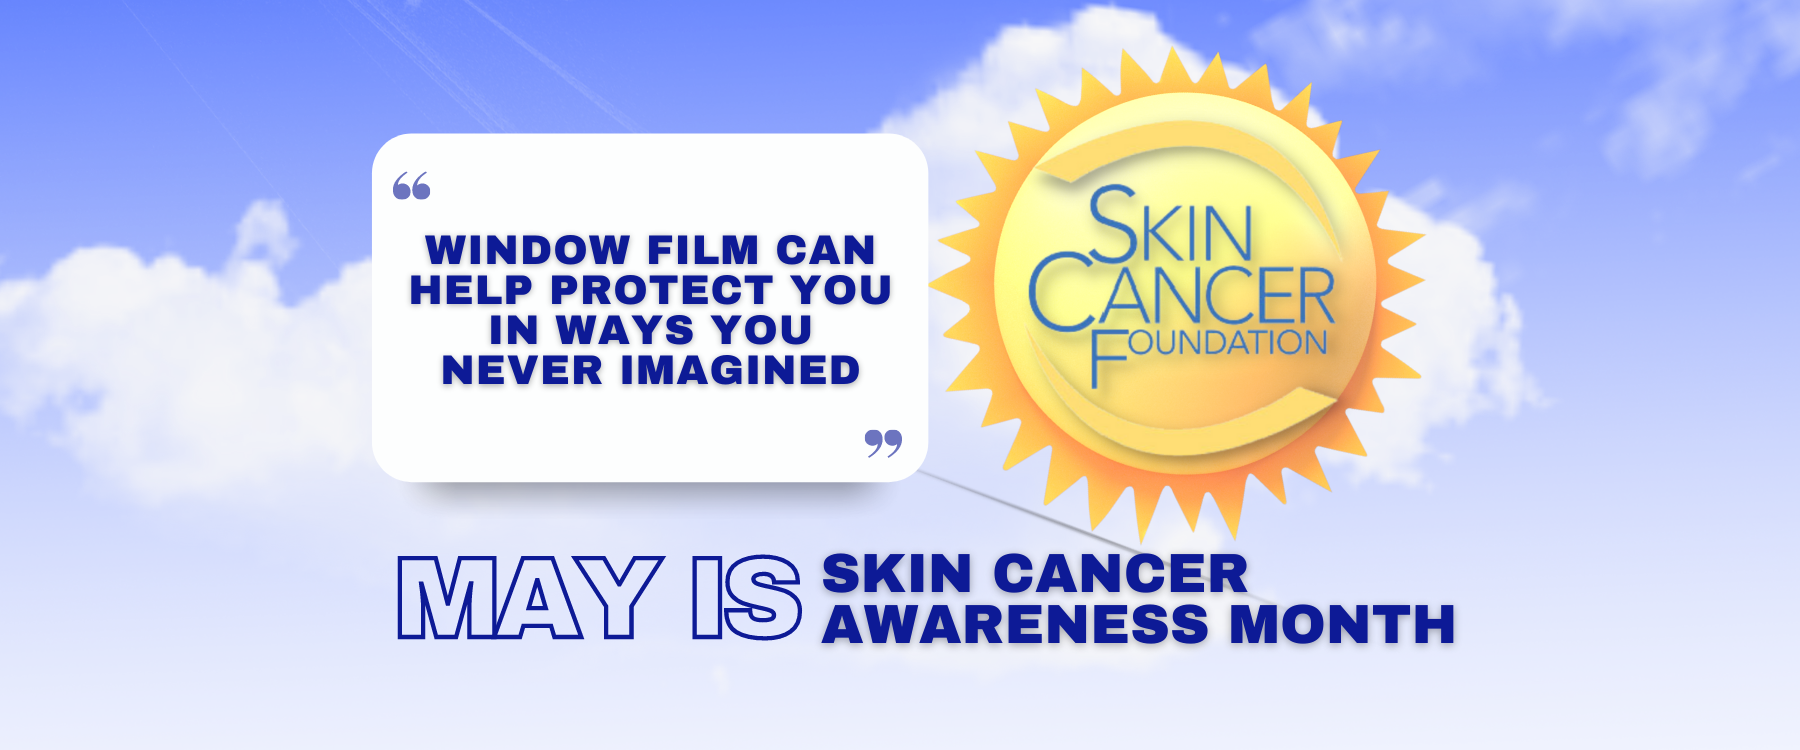 Featured image for “May Is Skin Cancer Awareness Month – See How Window Film Helps”